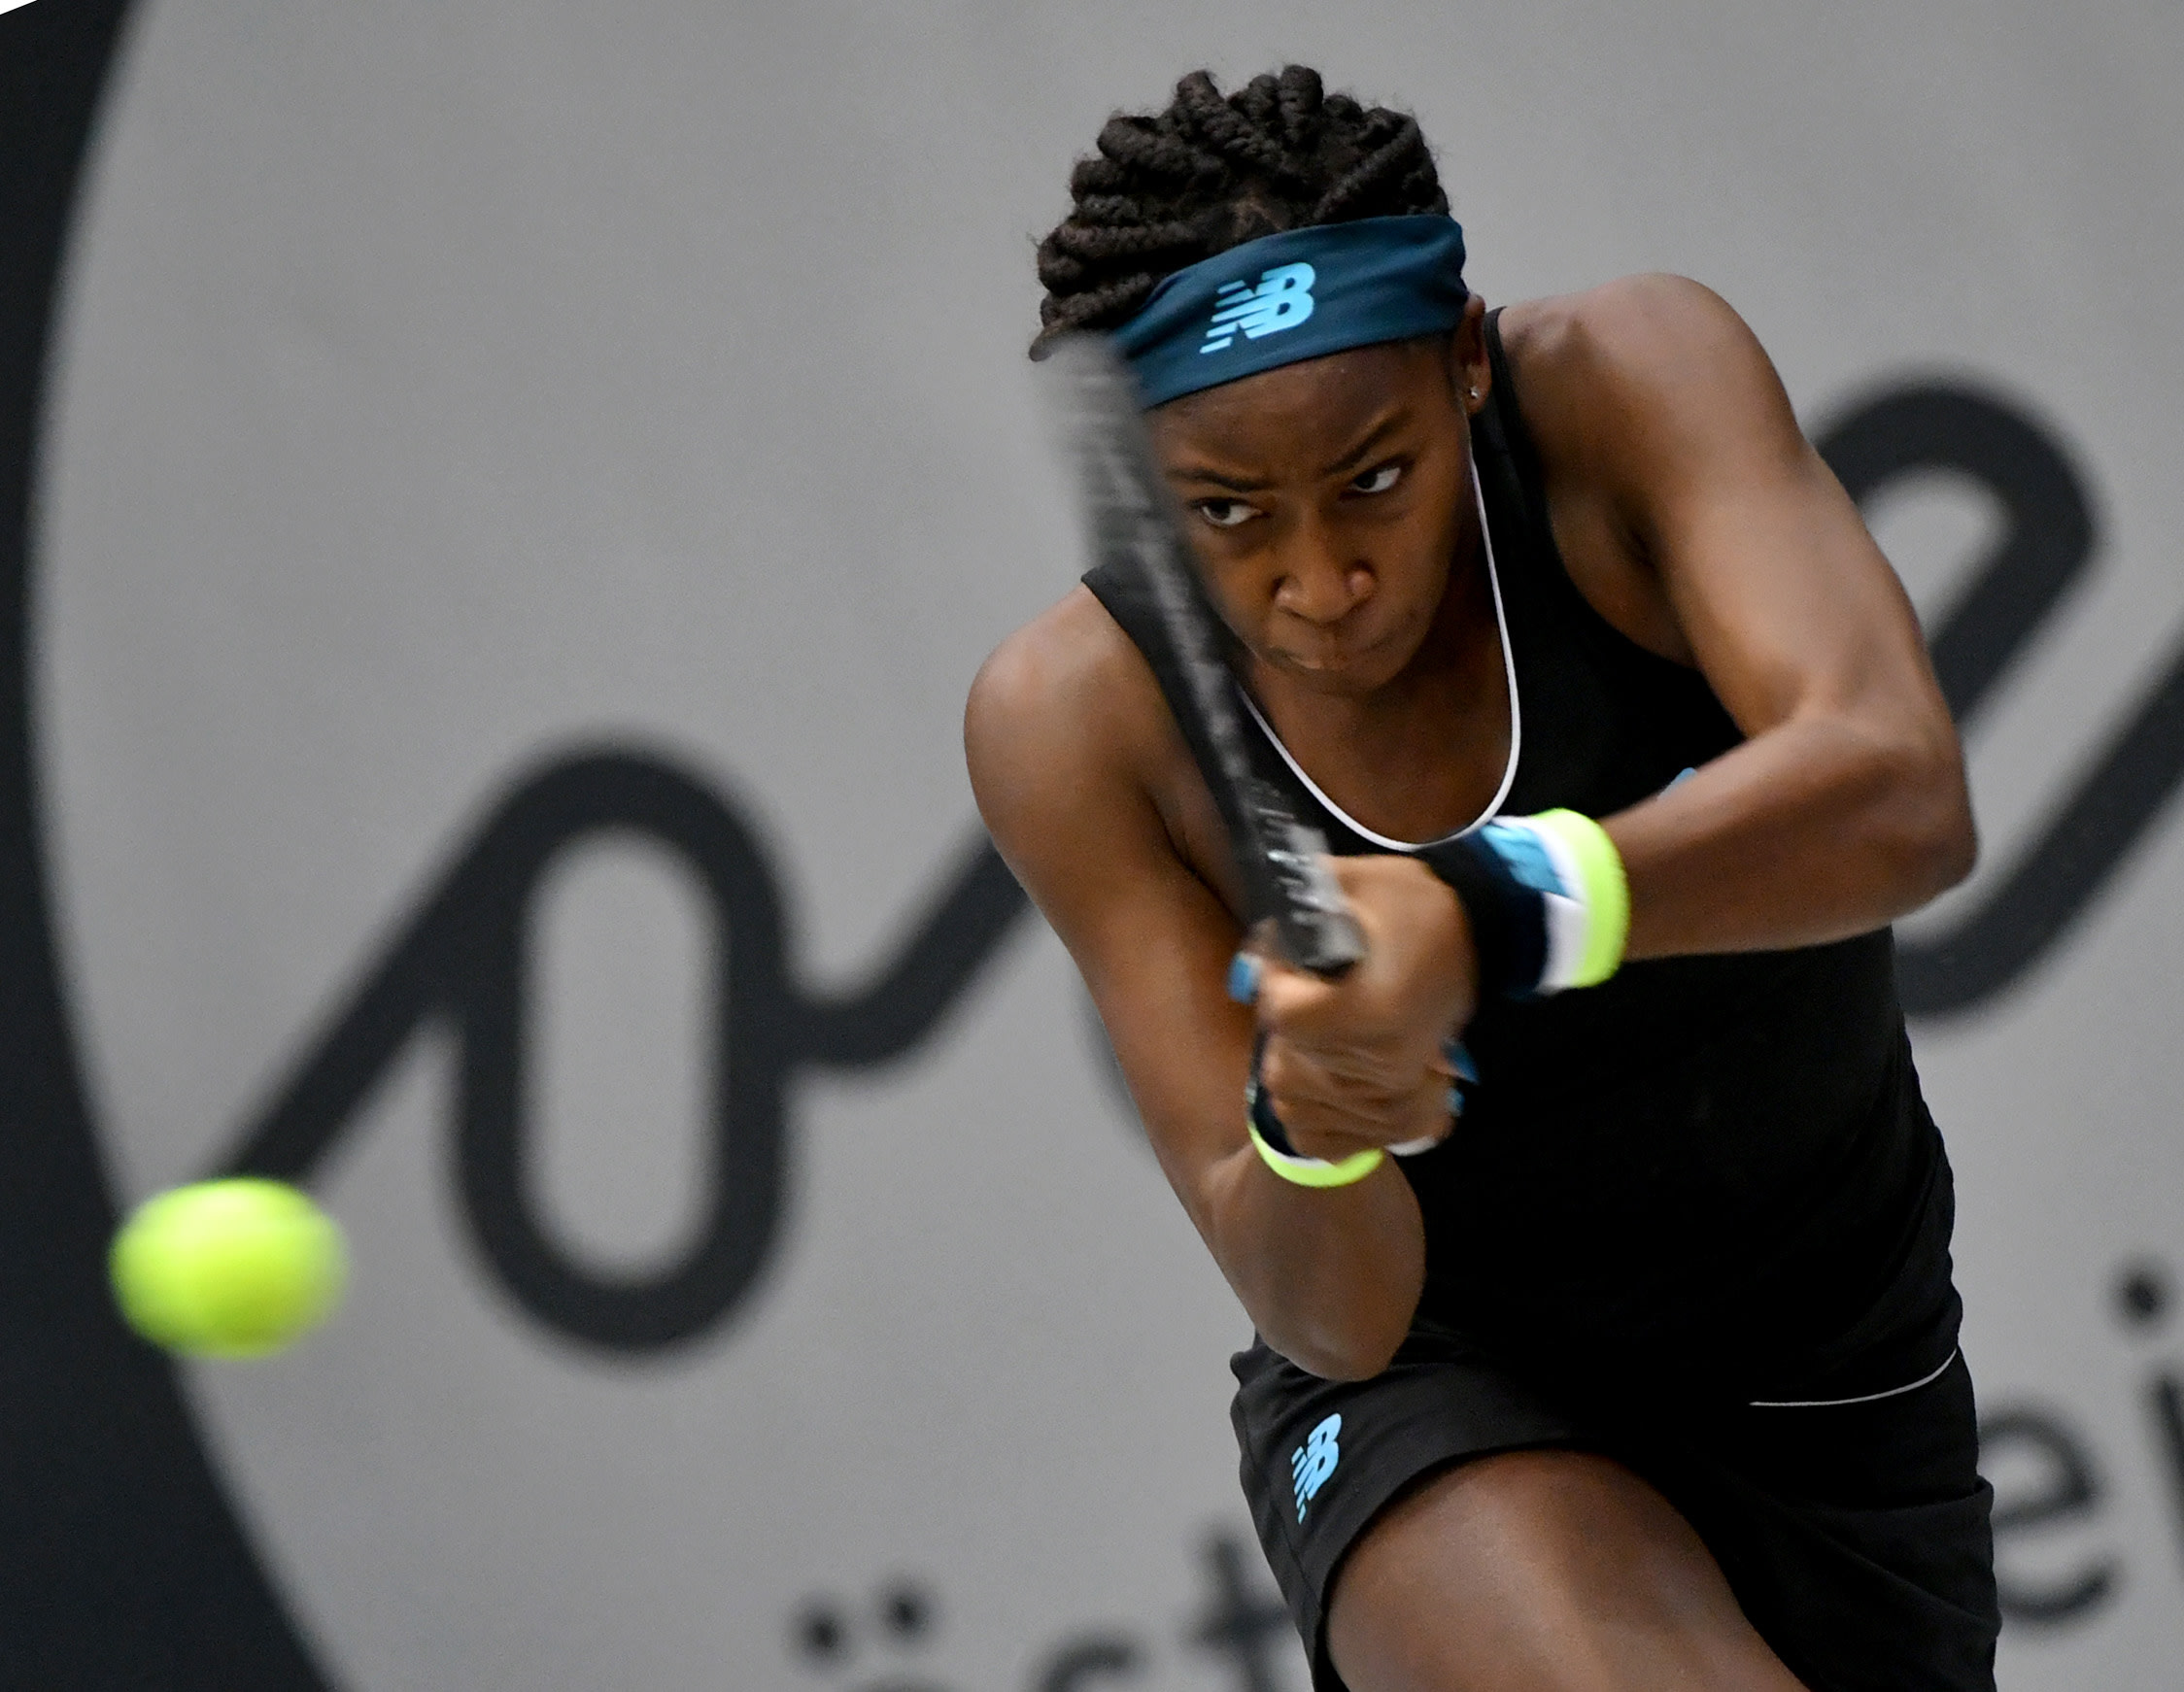 Lucky loser, Linz winner 15-year-old Coco Gauff earns first WTA title